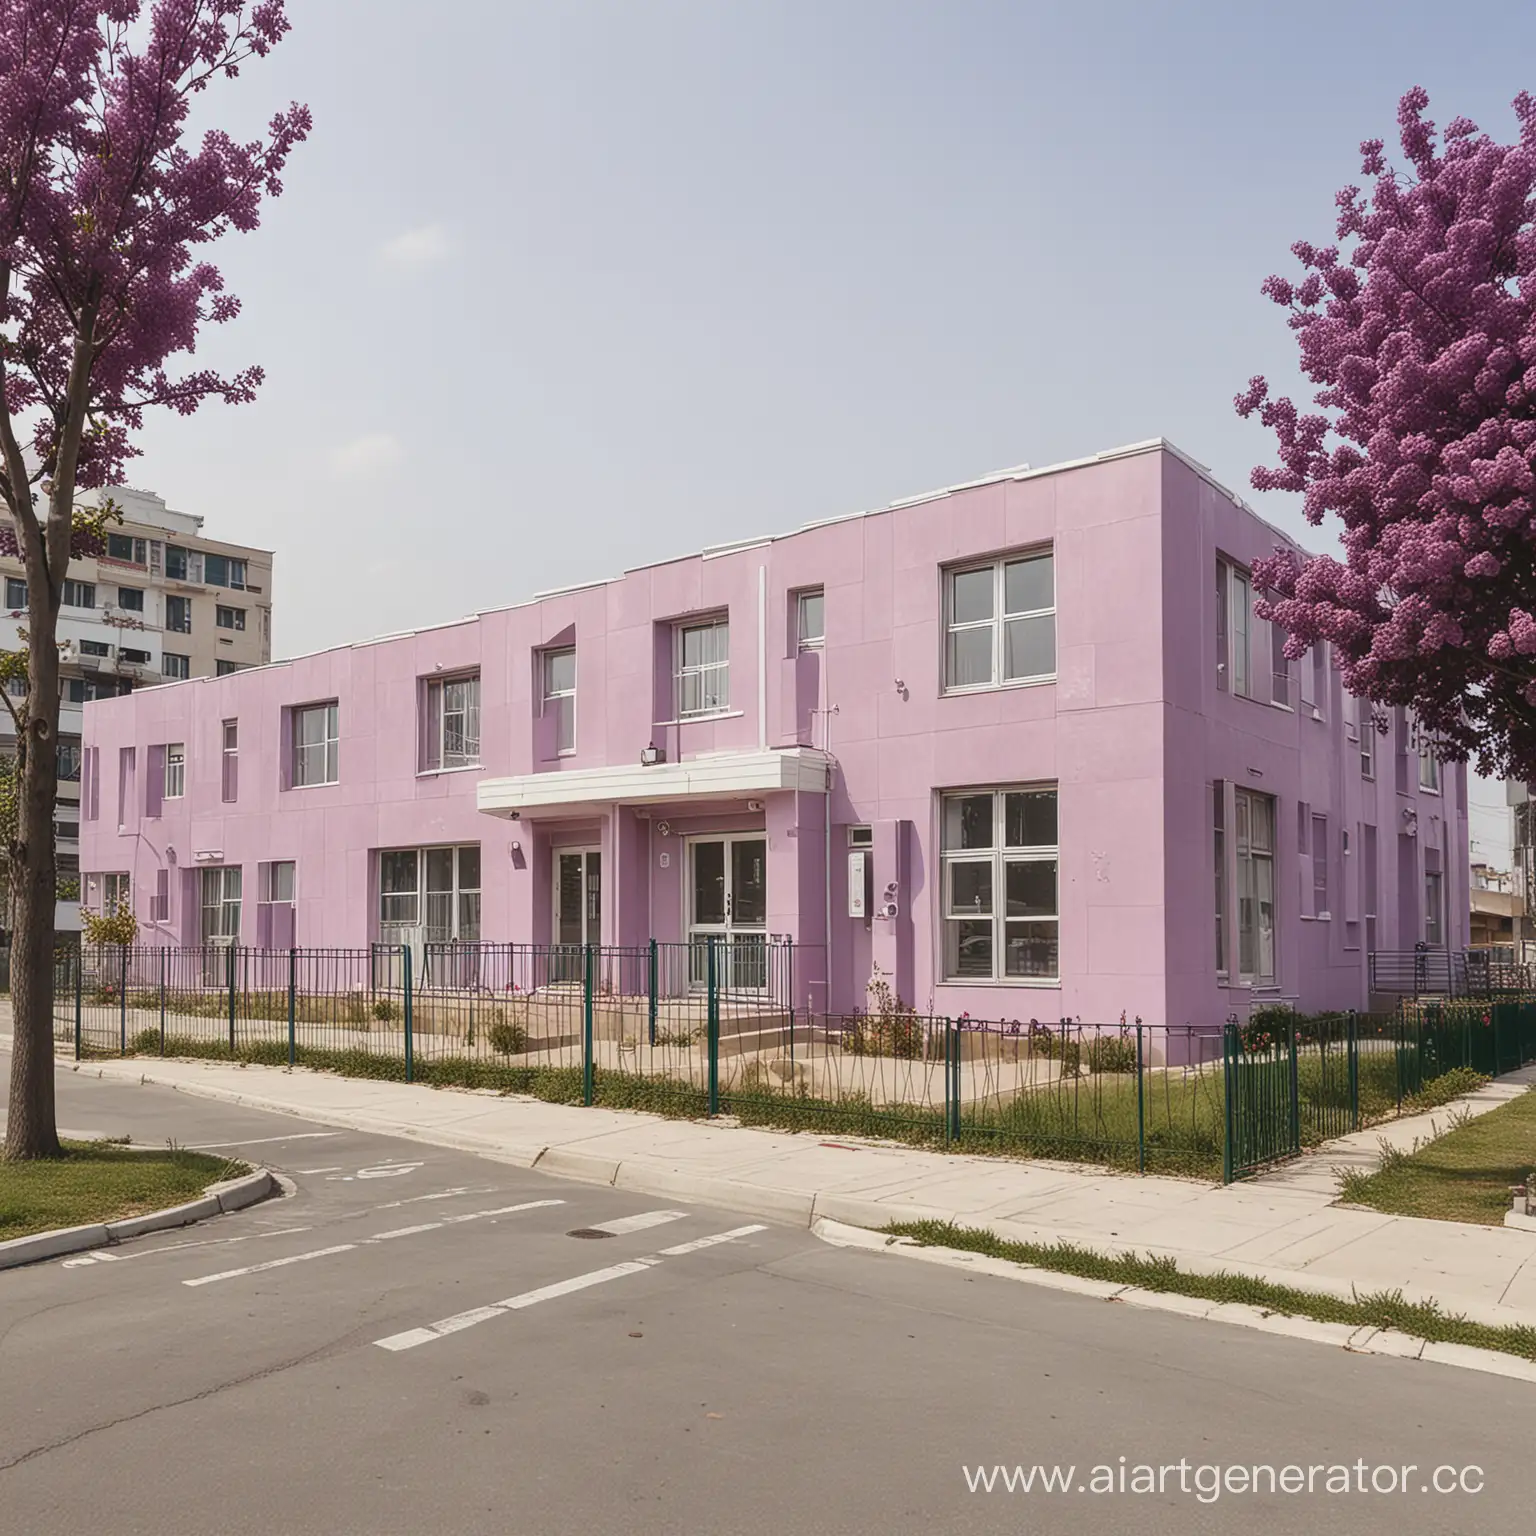 Lilac-Kindergarten-Building-with-Playful-Children-and-Blooming-Gardens